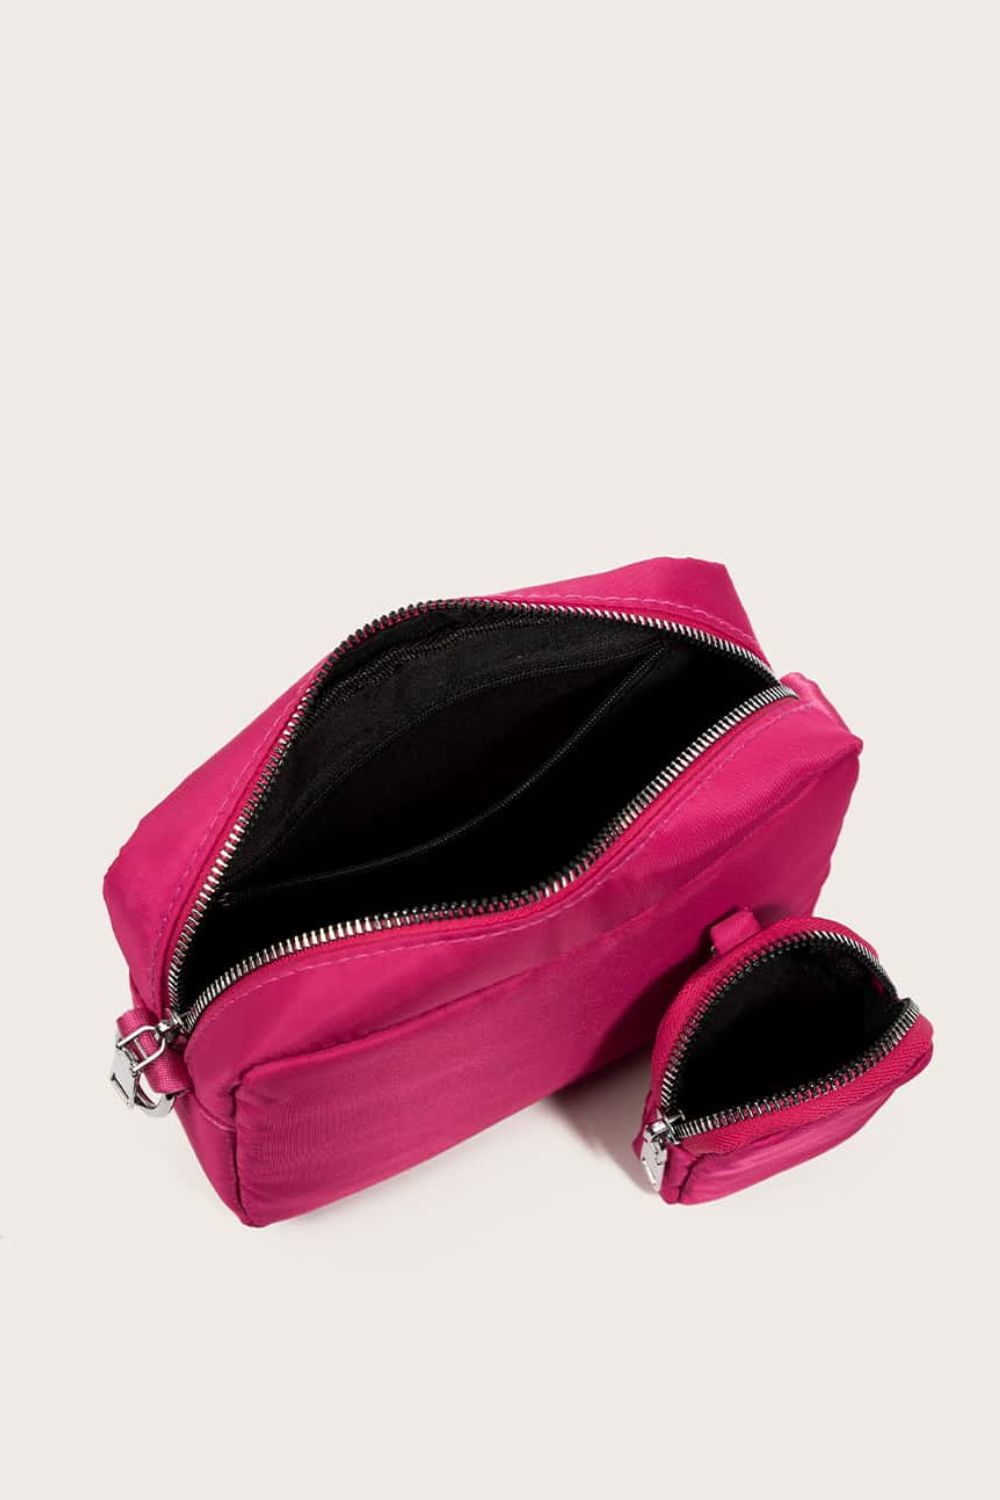 polyester shoulder handbag with small purse, cerise, top-down interior view, white background